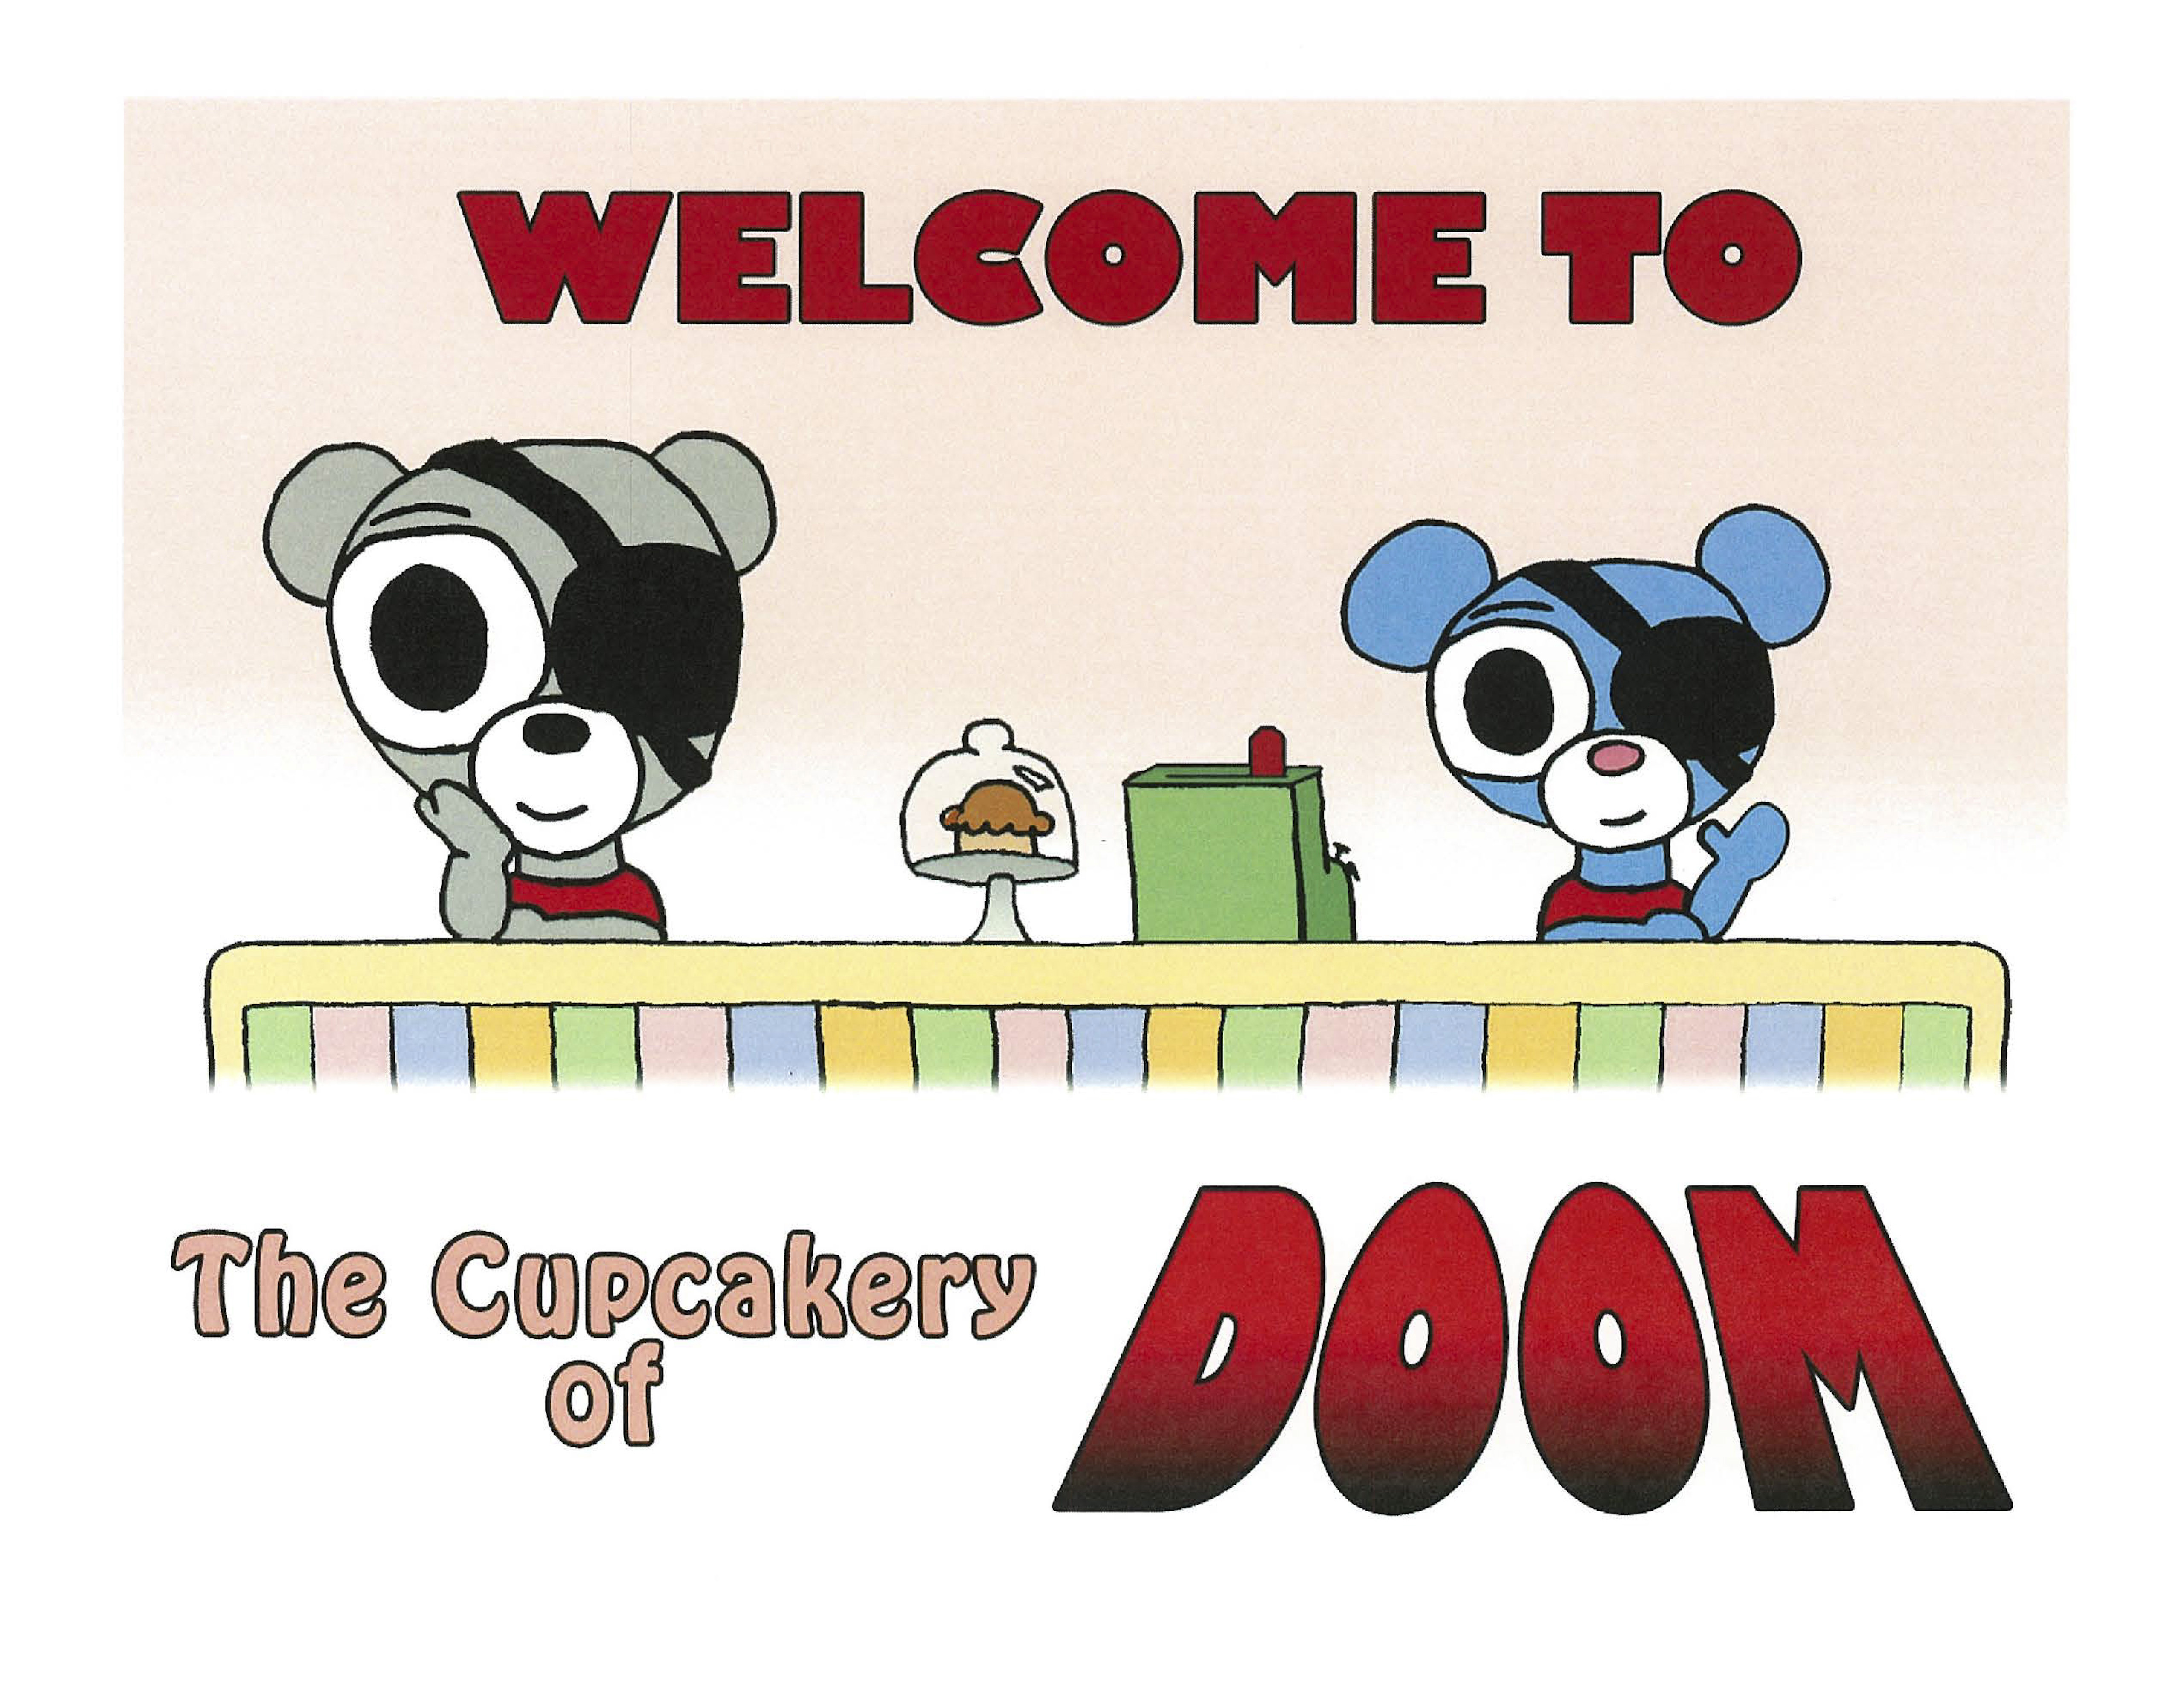 Nickelodeon Greenlights Discovery at Comic-Con for Animated Shorts Program,  Cupcakery of Doom | Business Wire